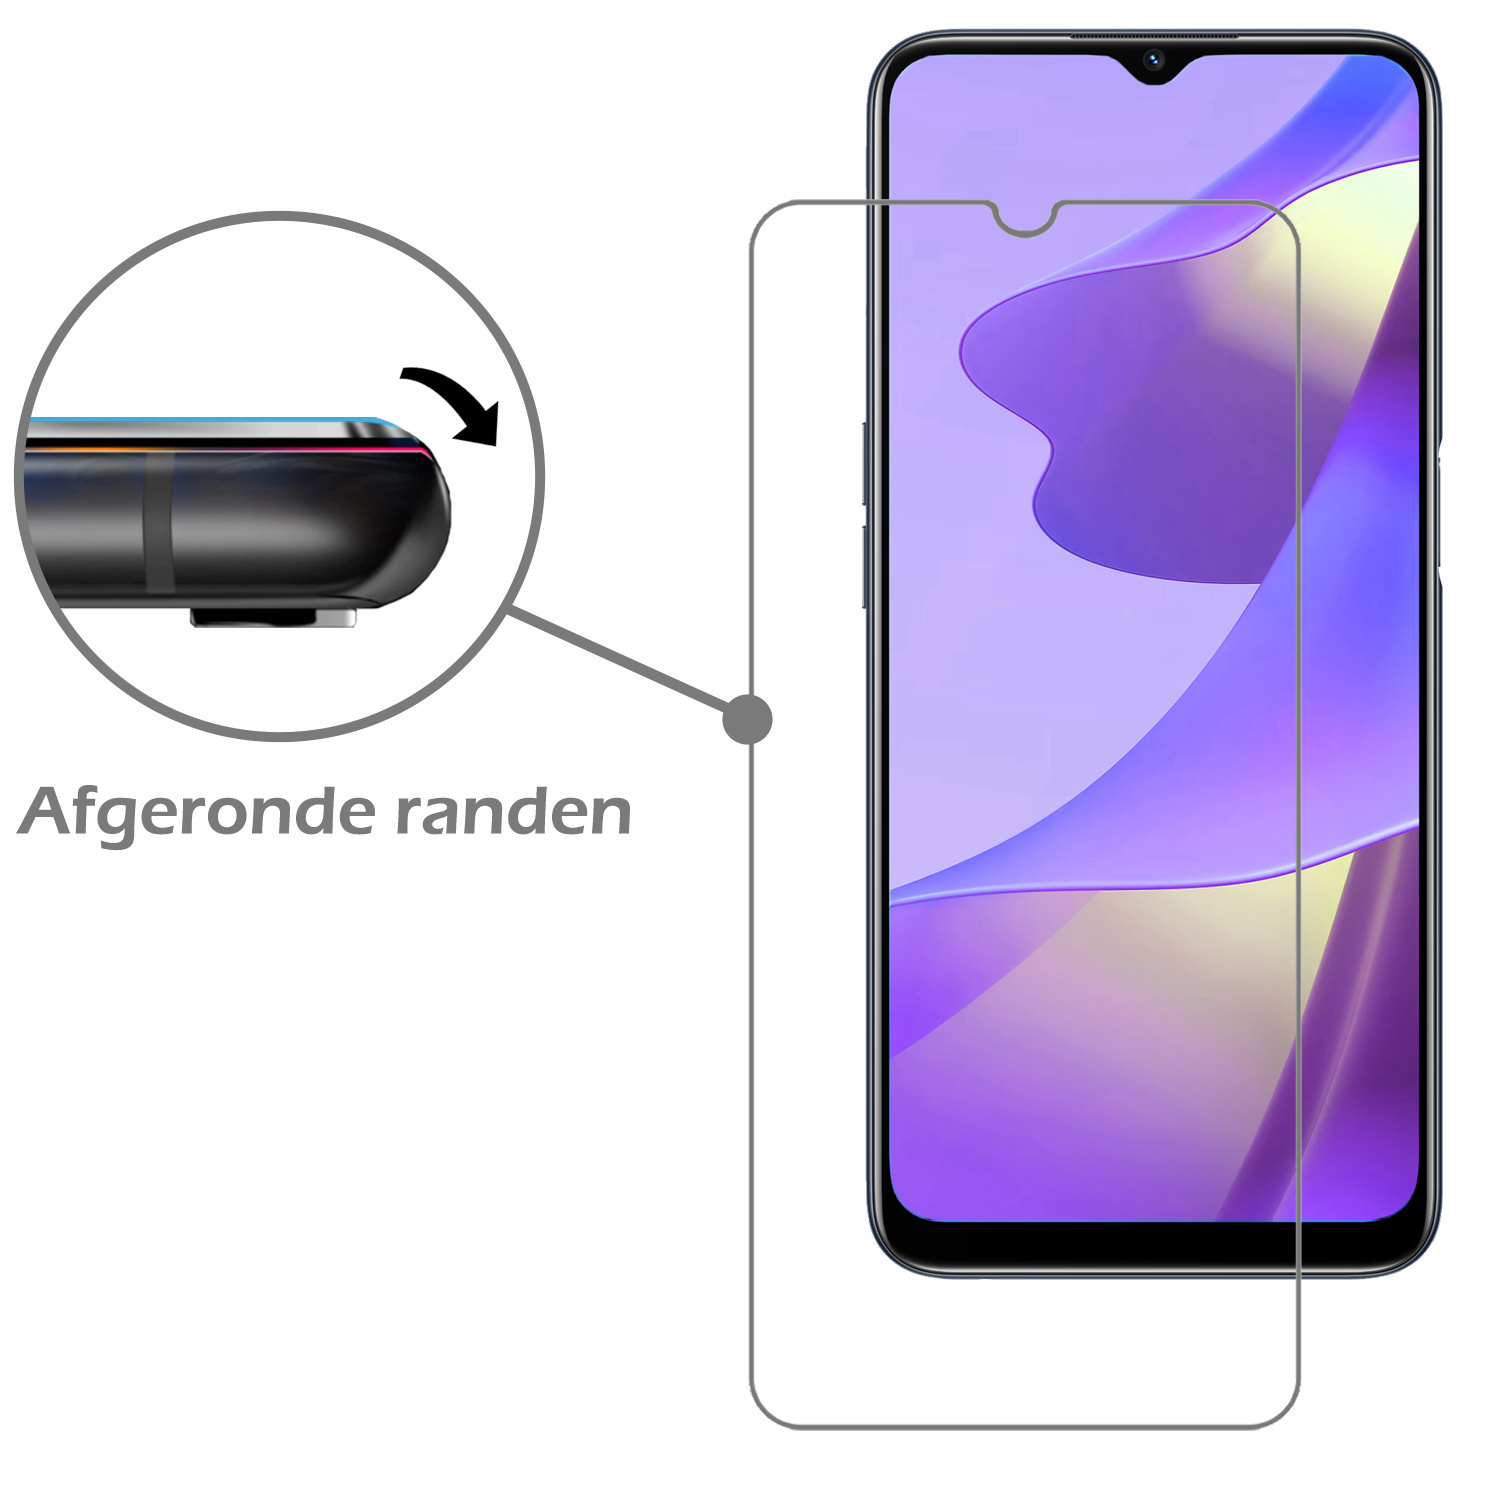 Nomfy OPPO A16s Hoesje Bookcase Met 2x Screenprotector - OPPO A16s Screenprotector 2x - OPPO A16s Book Case Met 2x Screenprotector Paars